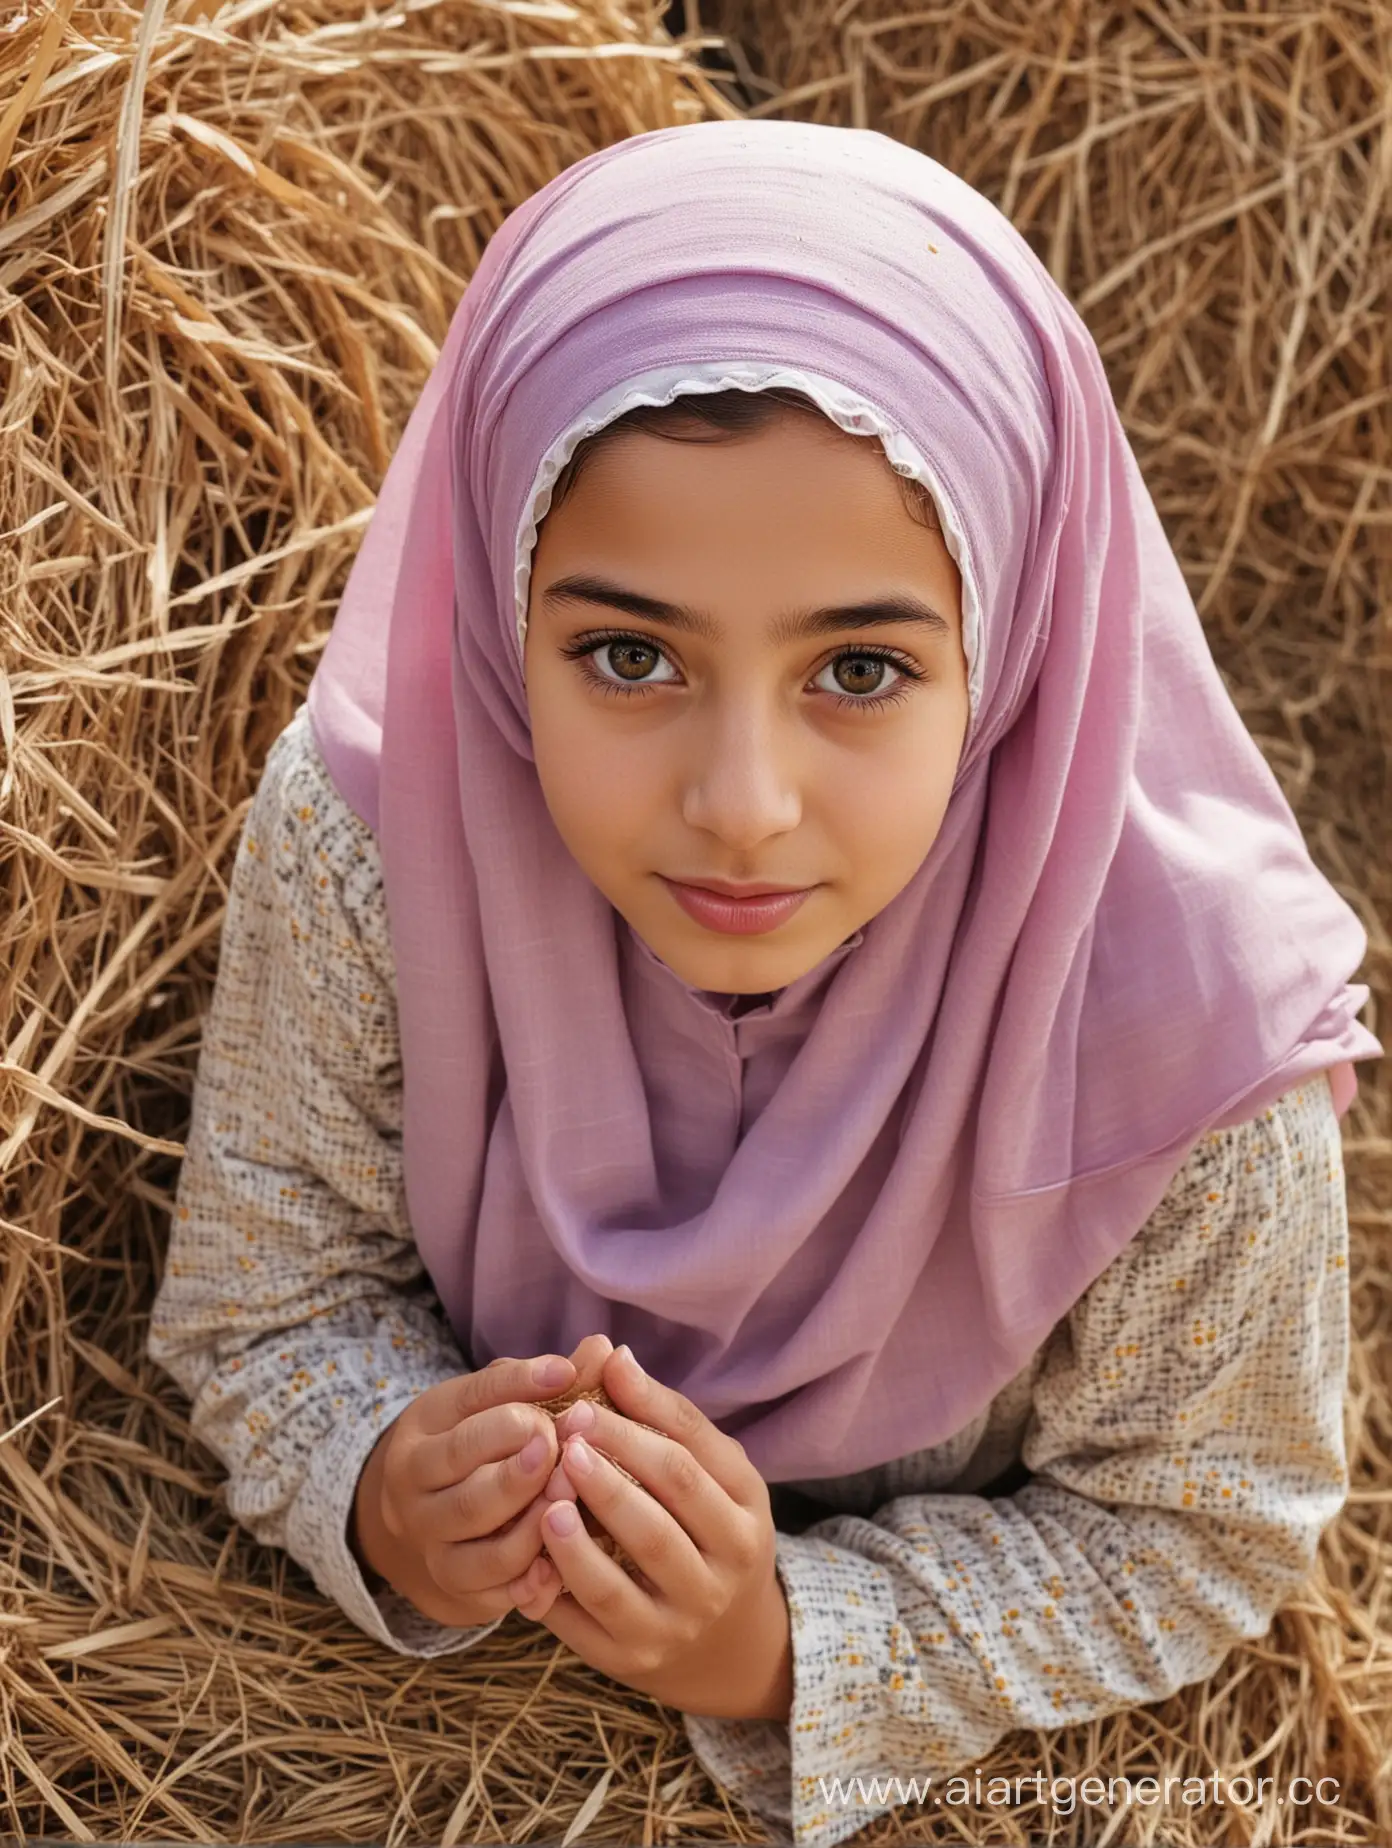 A little turkish girl. 12 years old. She wears a hijab, kids wear. Her height is 130cm. Close pov shot. Close up. From above. 8k sharp. Pretty face. Sits on the hay bales. The girl extends her hands to the viewer. Pursed lips.